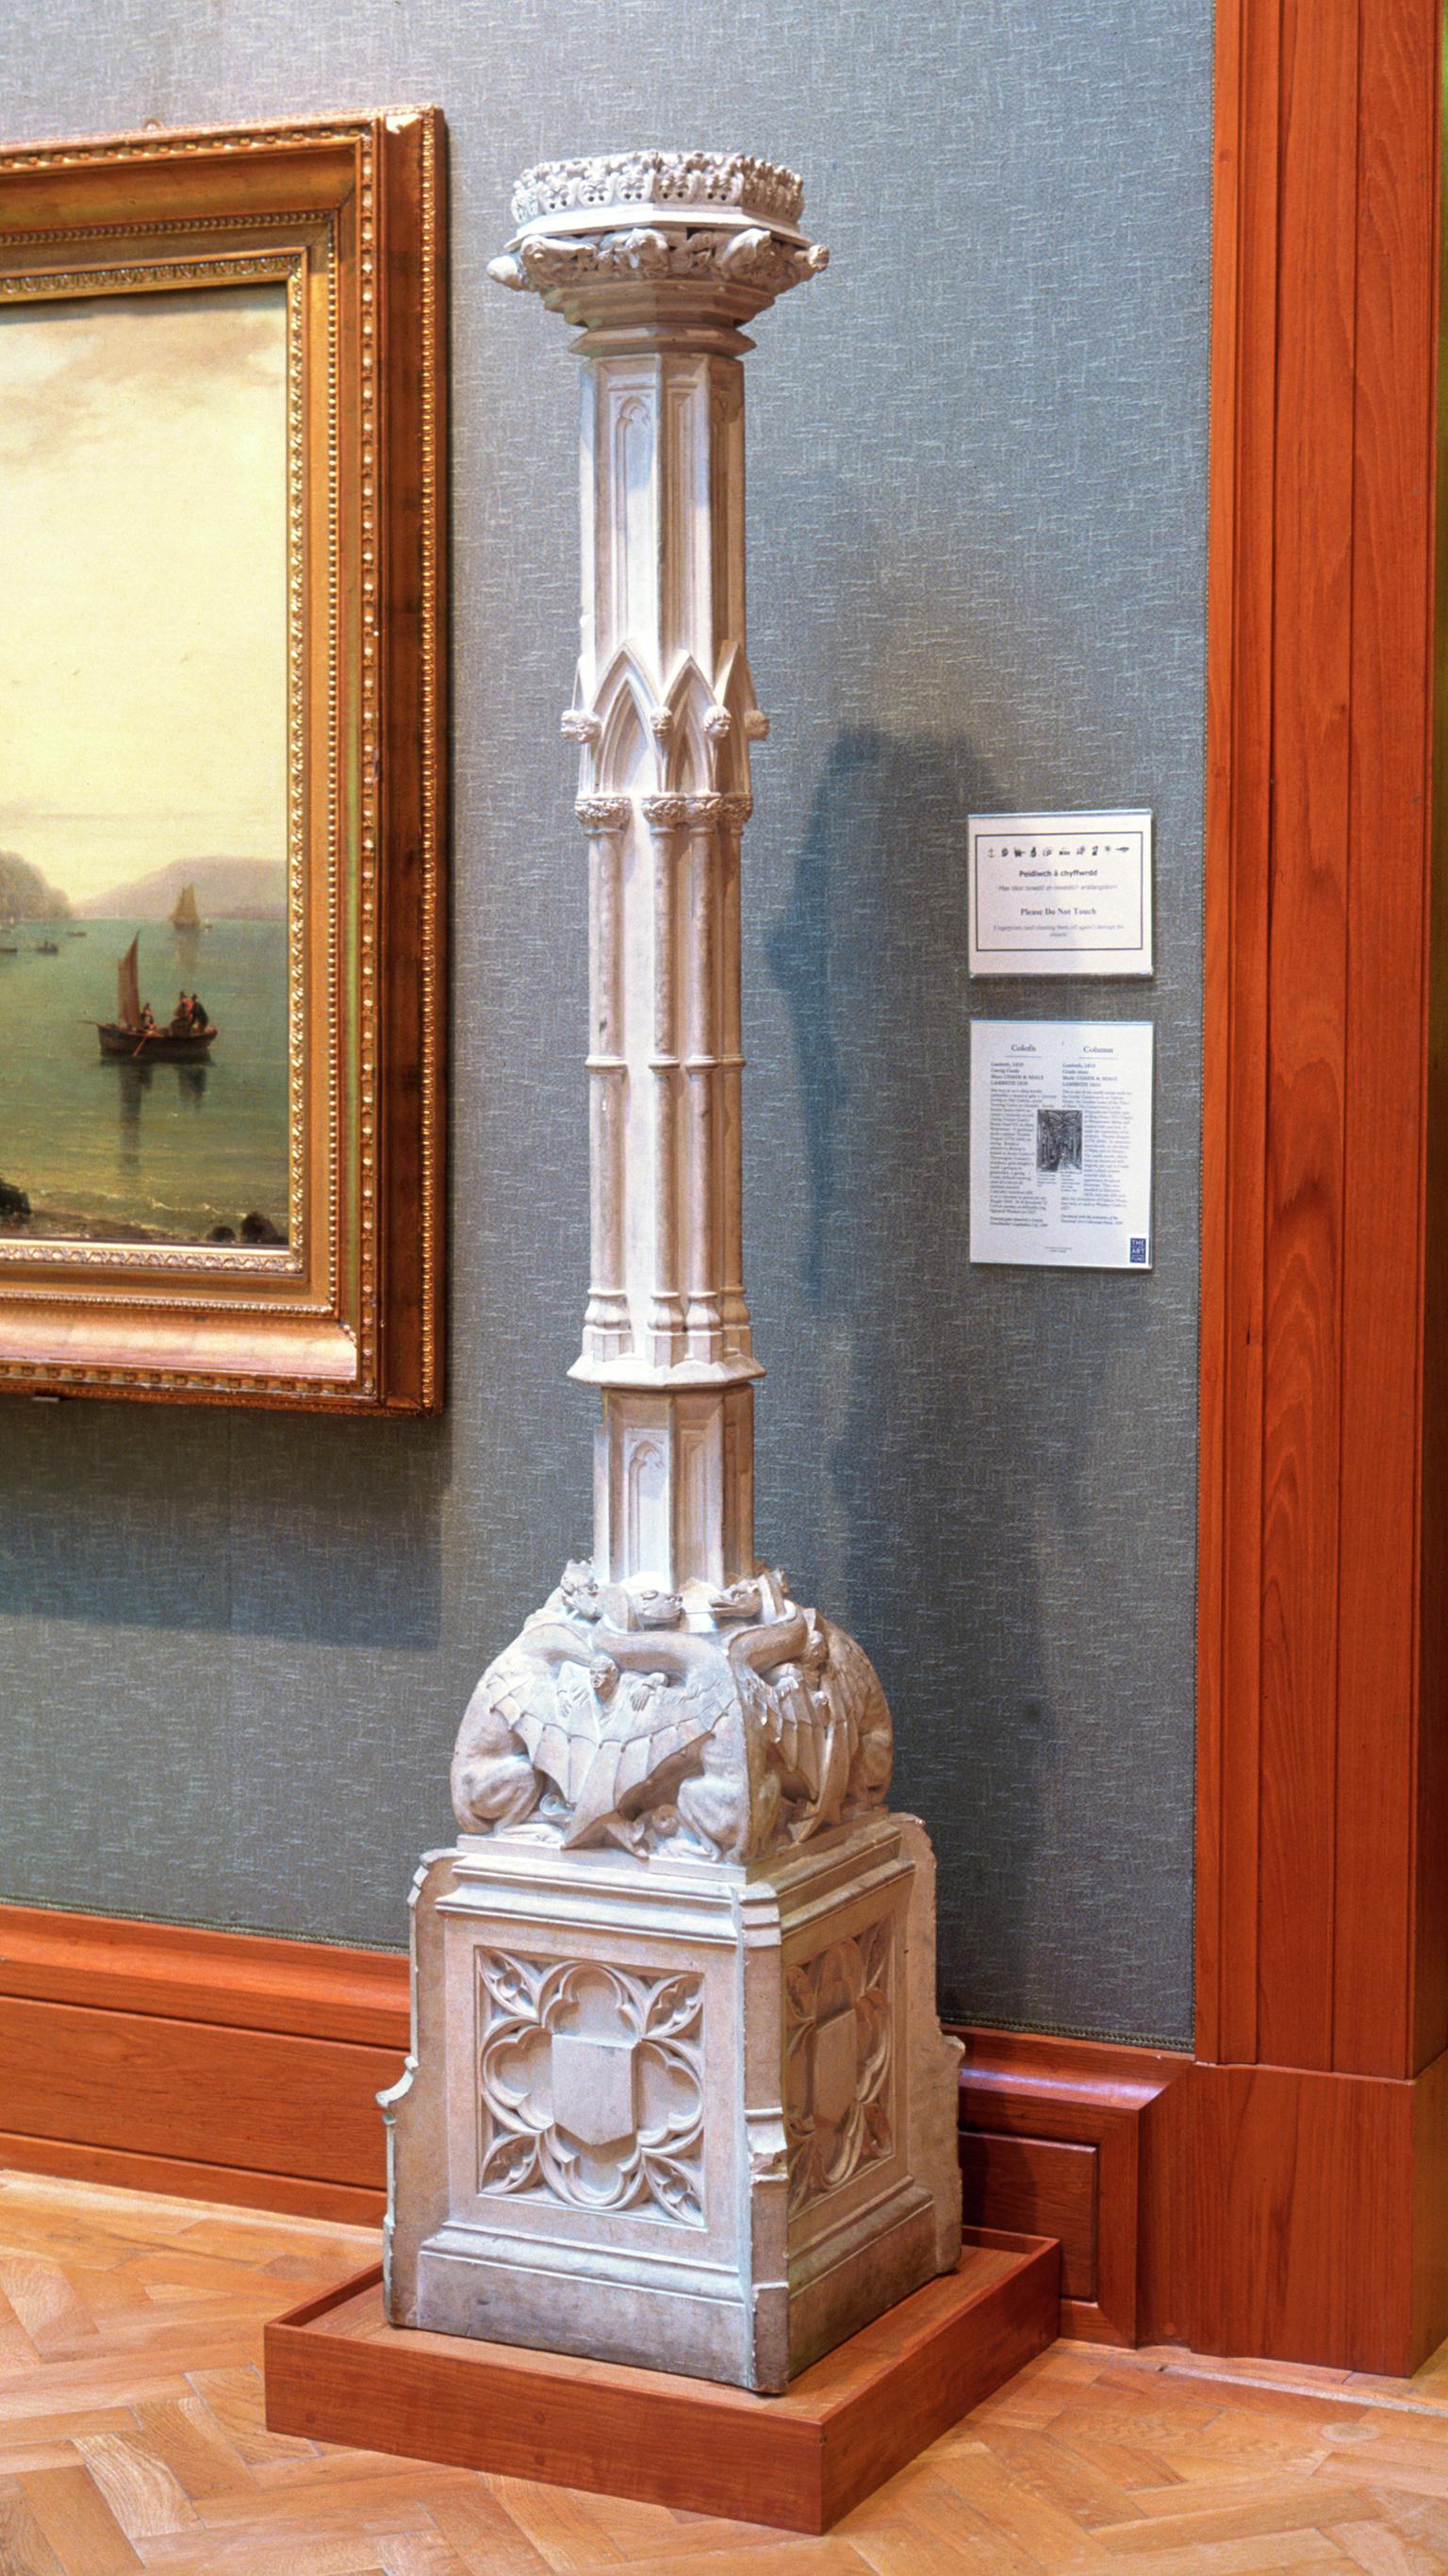 NMW A 30042, candle stand, coade stone, made by Coade & Sealy, Lambeth, 1810, possibly designed by Thomas Hopper or Auguste Charles Pugin, 1809